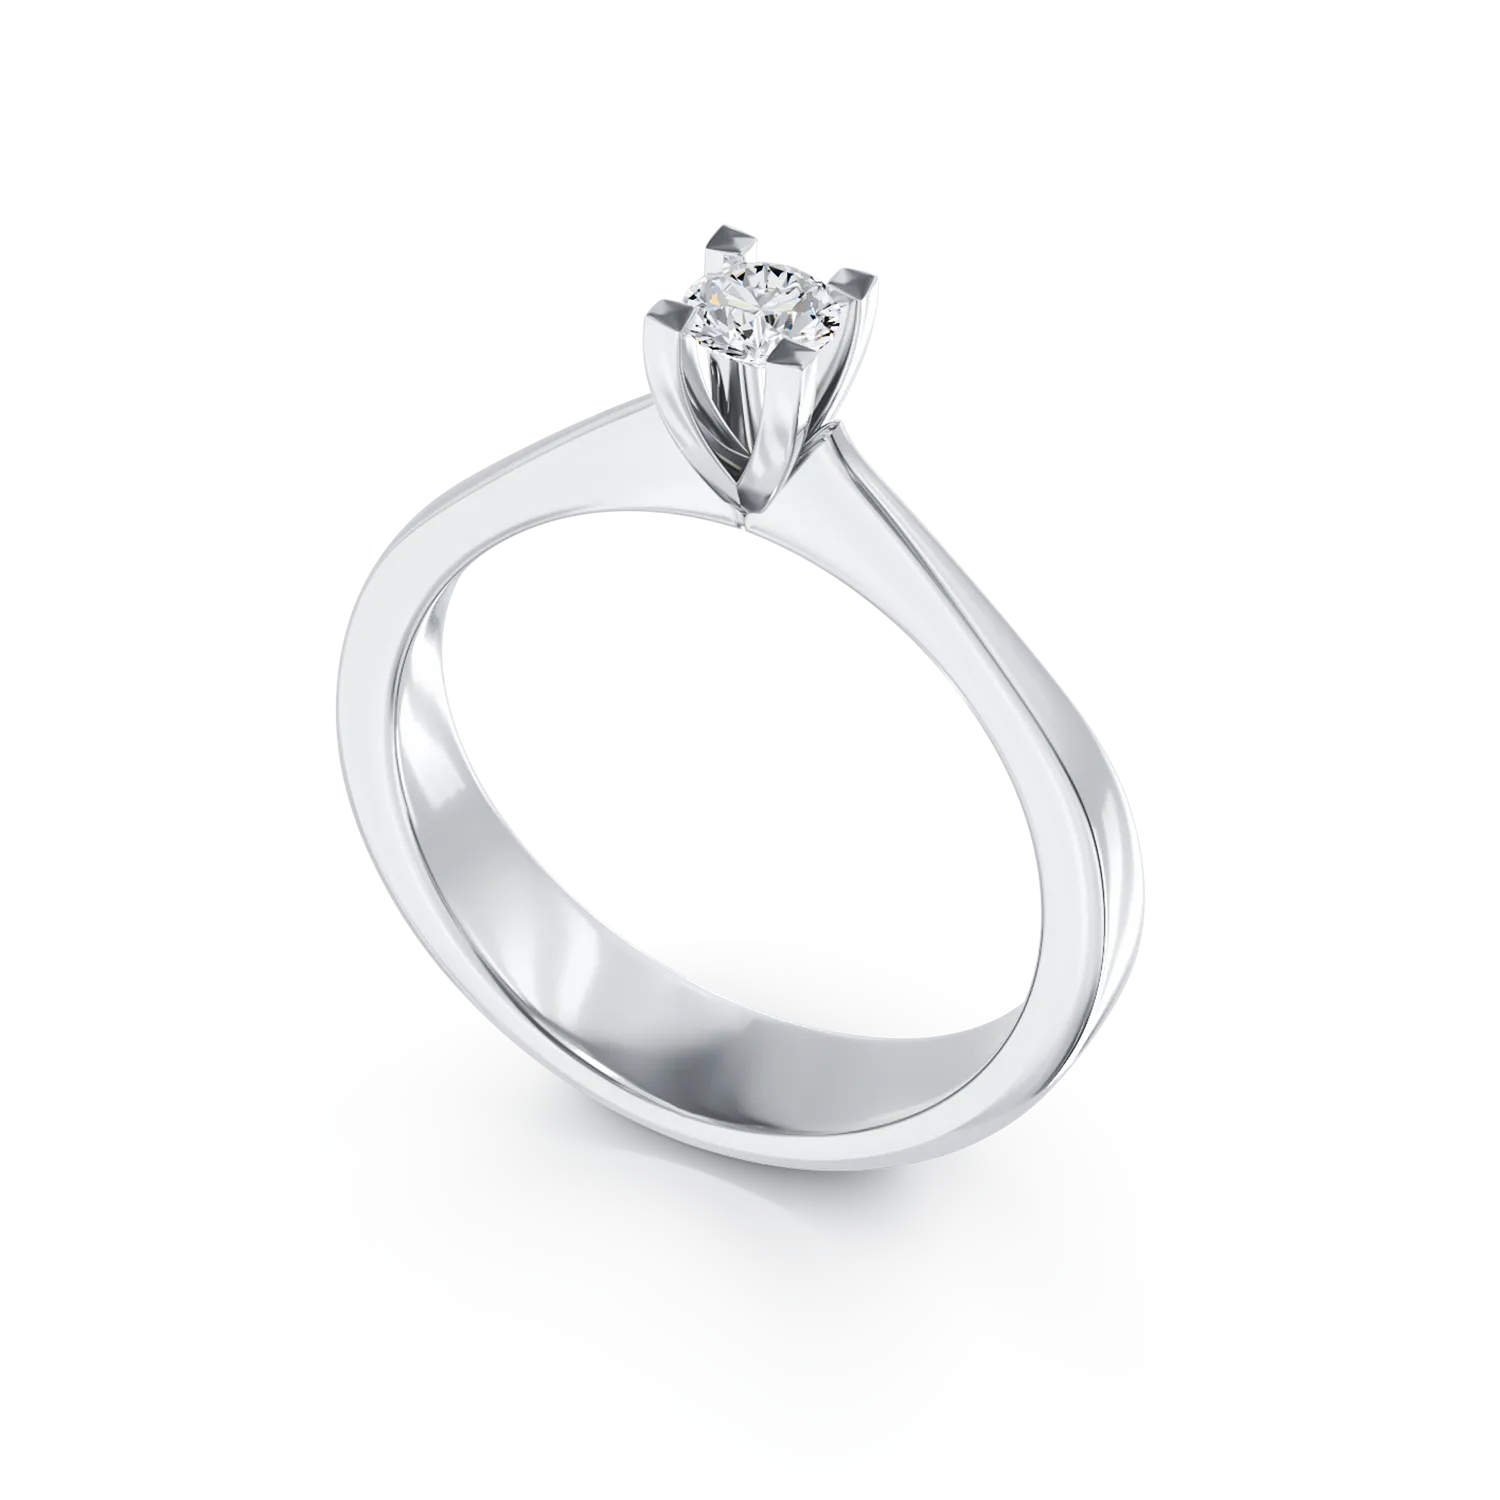 18K white gold engagement ring with a 0.4ct solitaire diamond